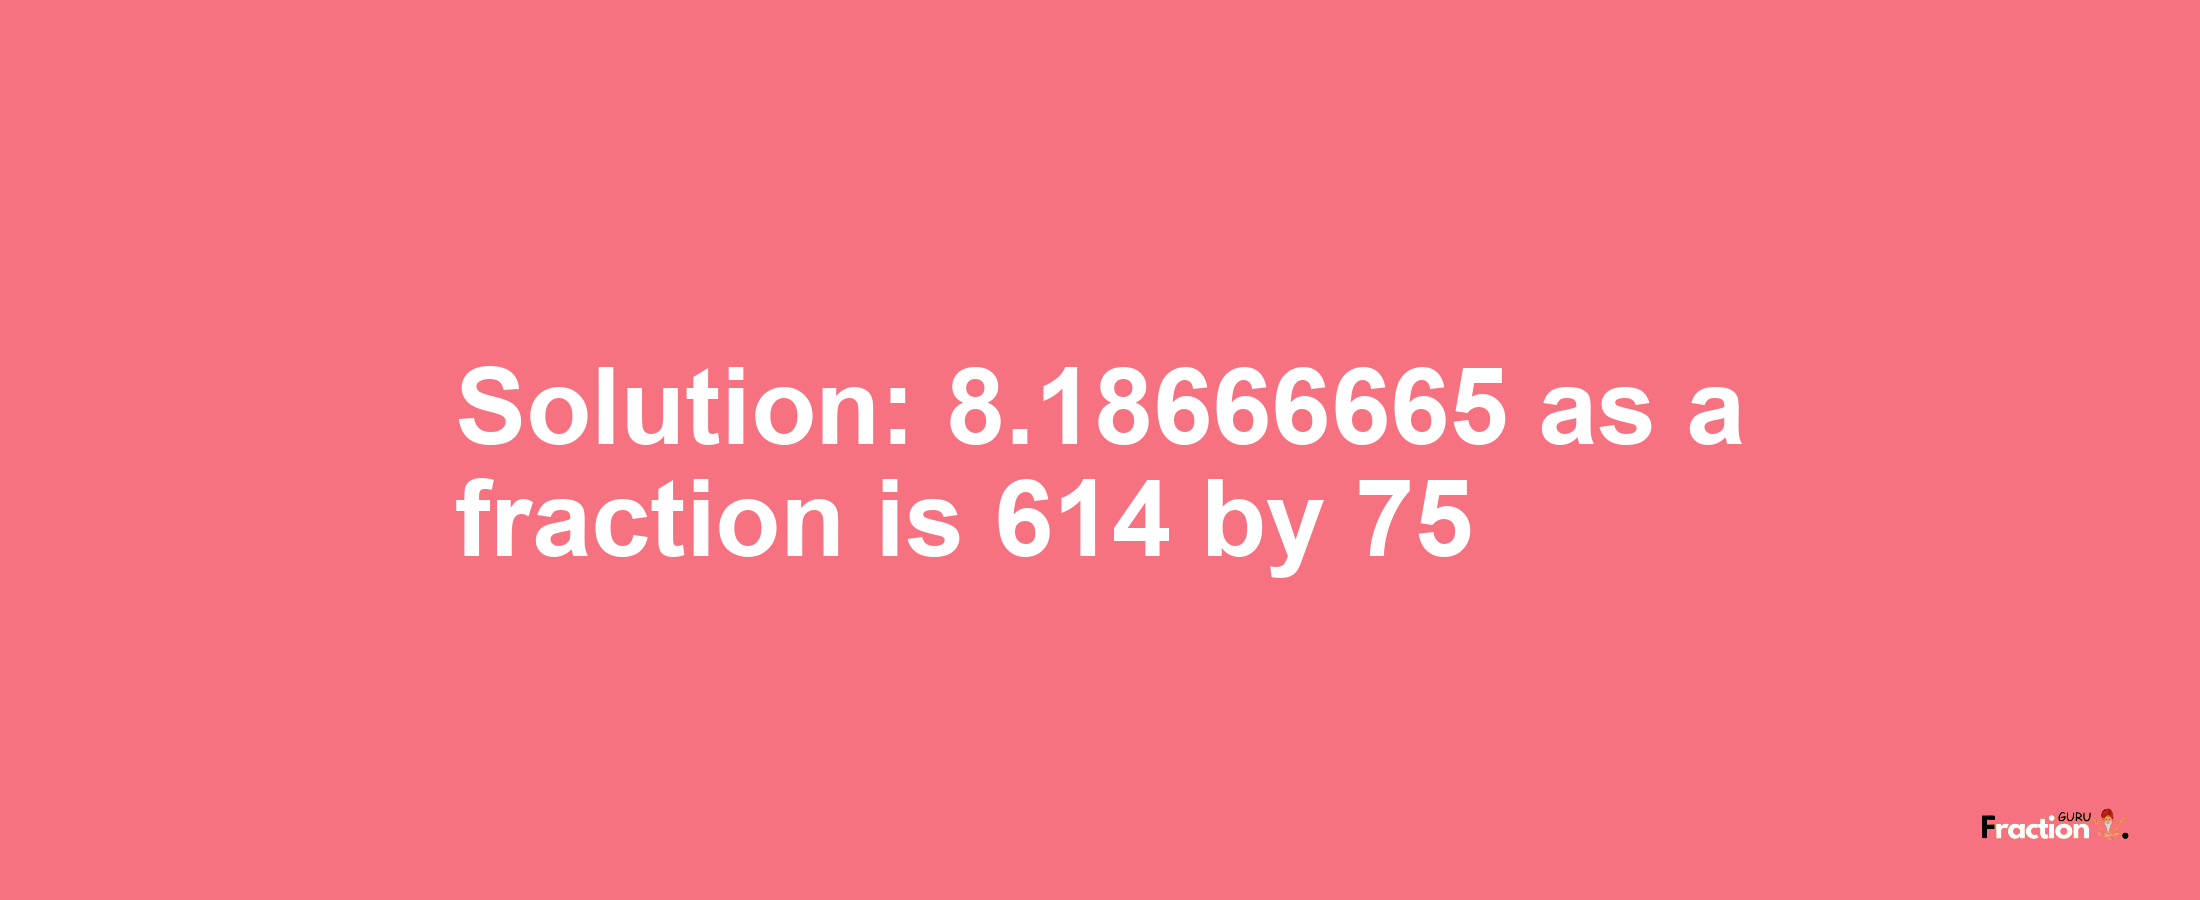 Solution:8.18666665 as a fraction is 614/75